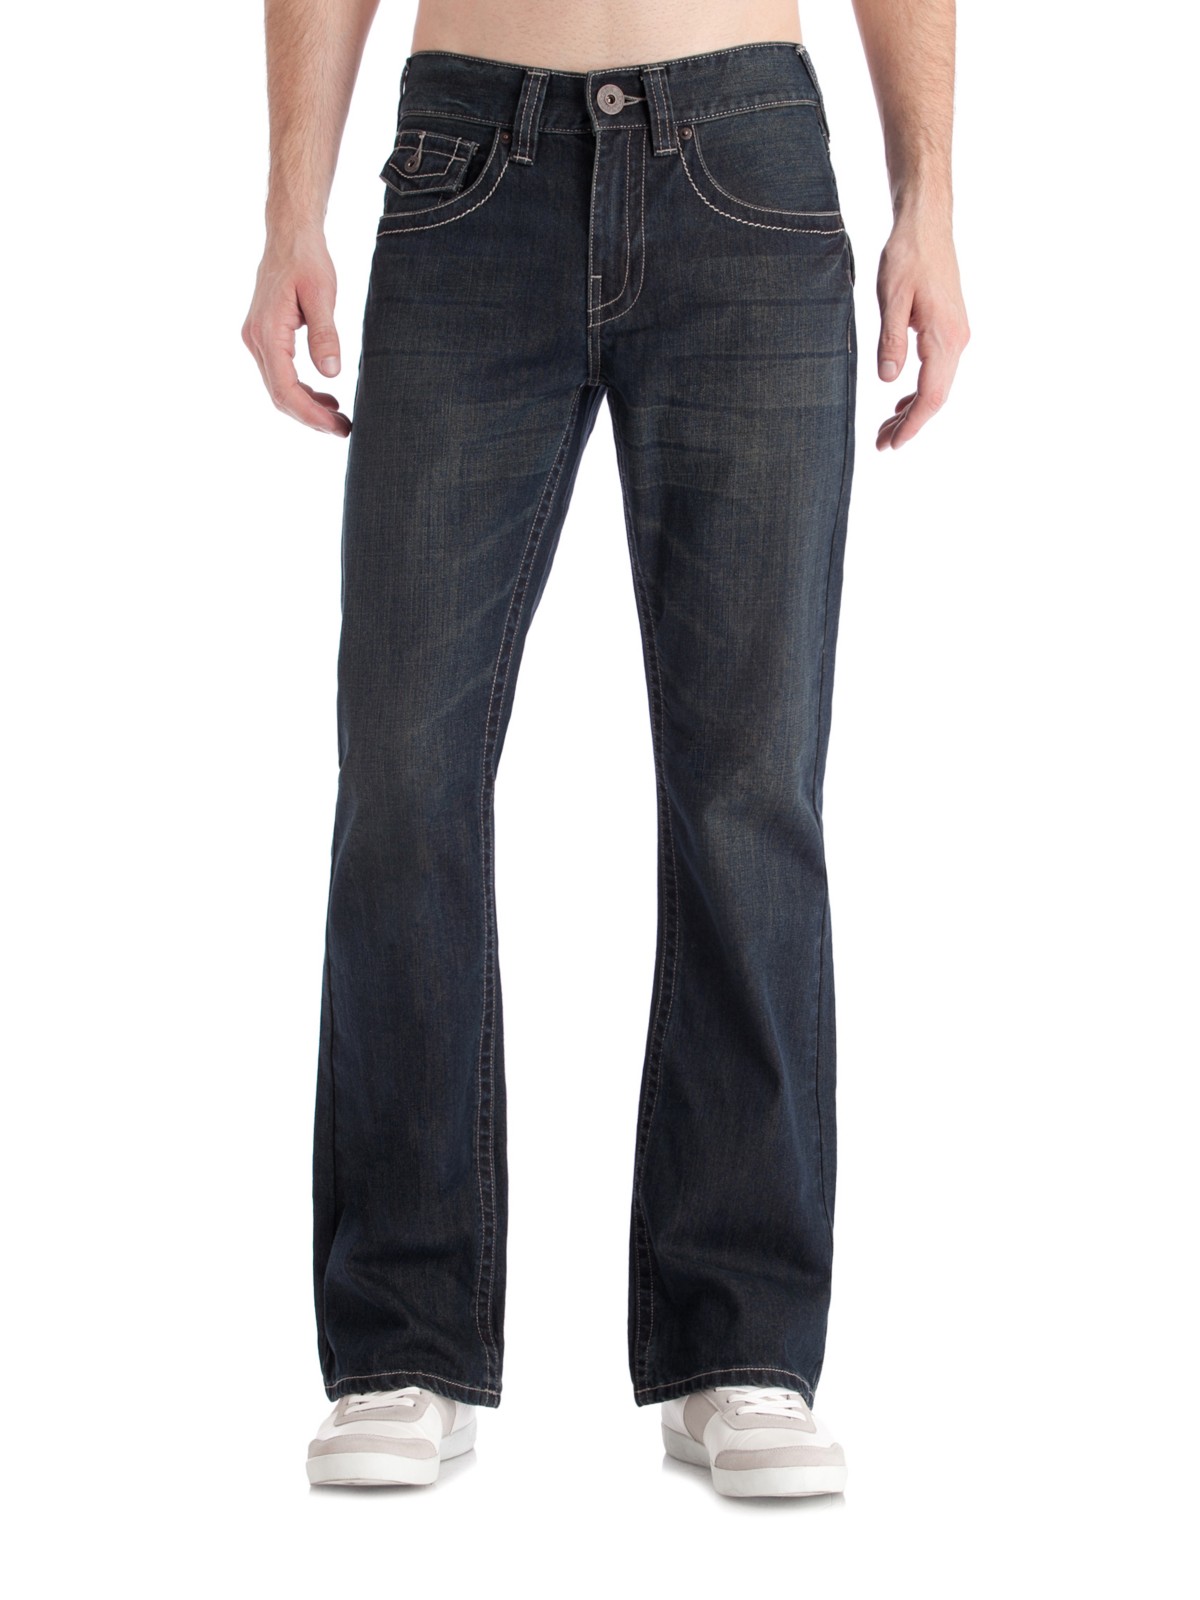 GUESS Rancho Bootcut Jeans - 30